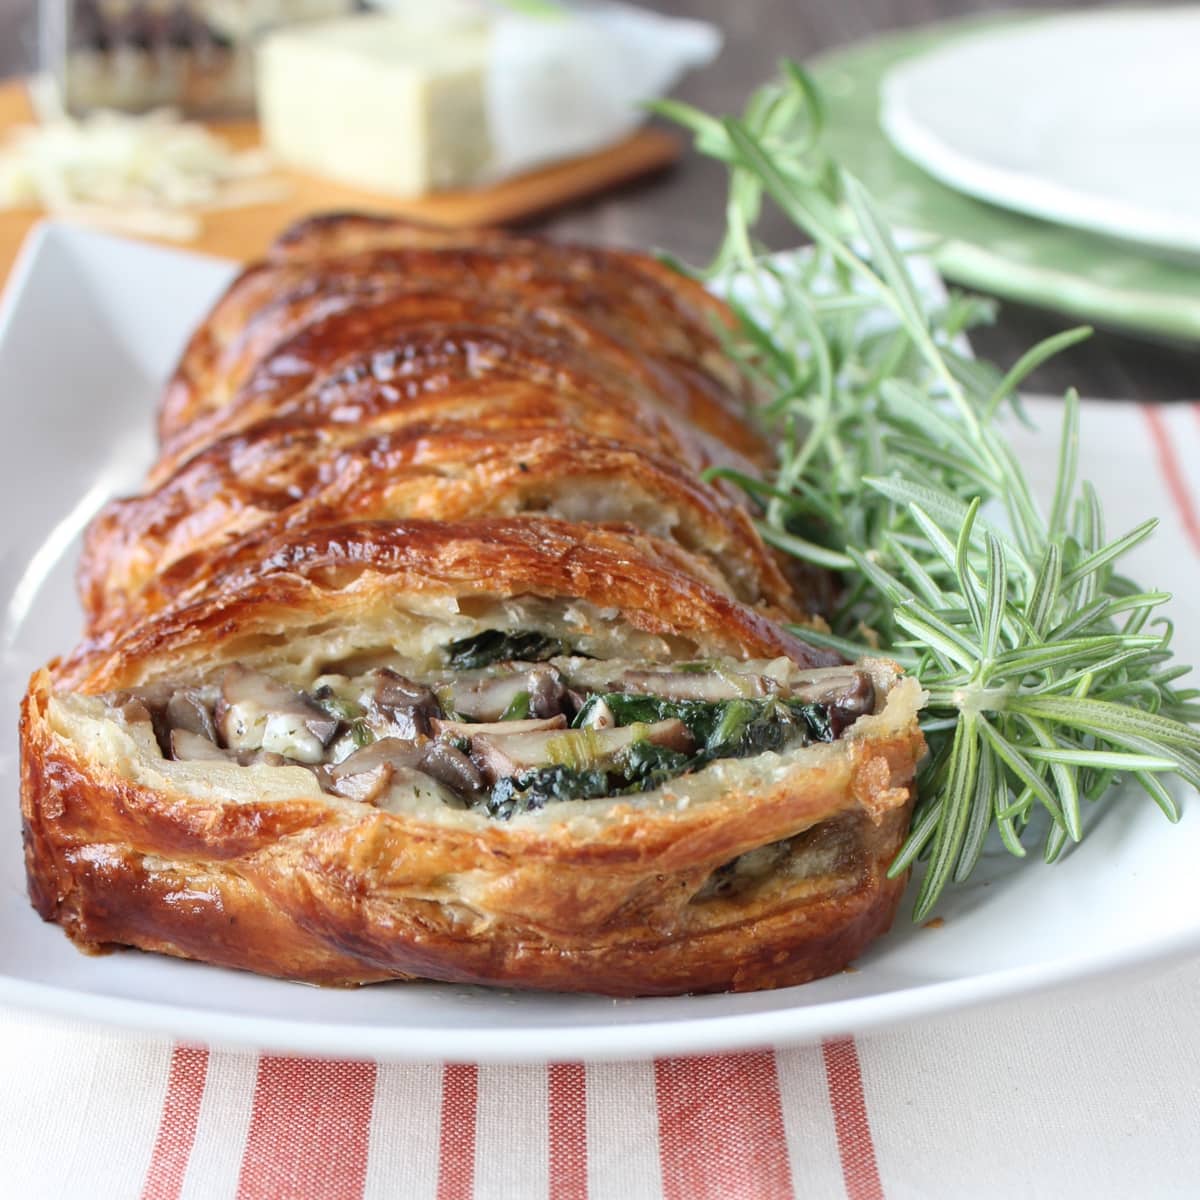 baked braided puff pastry on plate with fresh rosemary